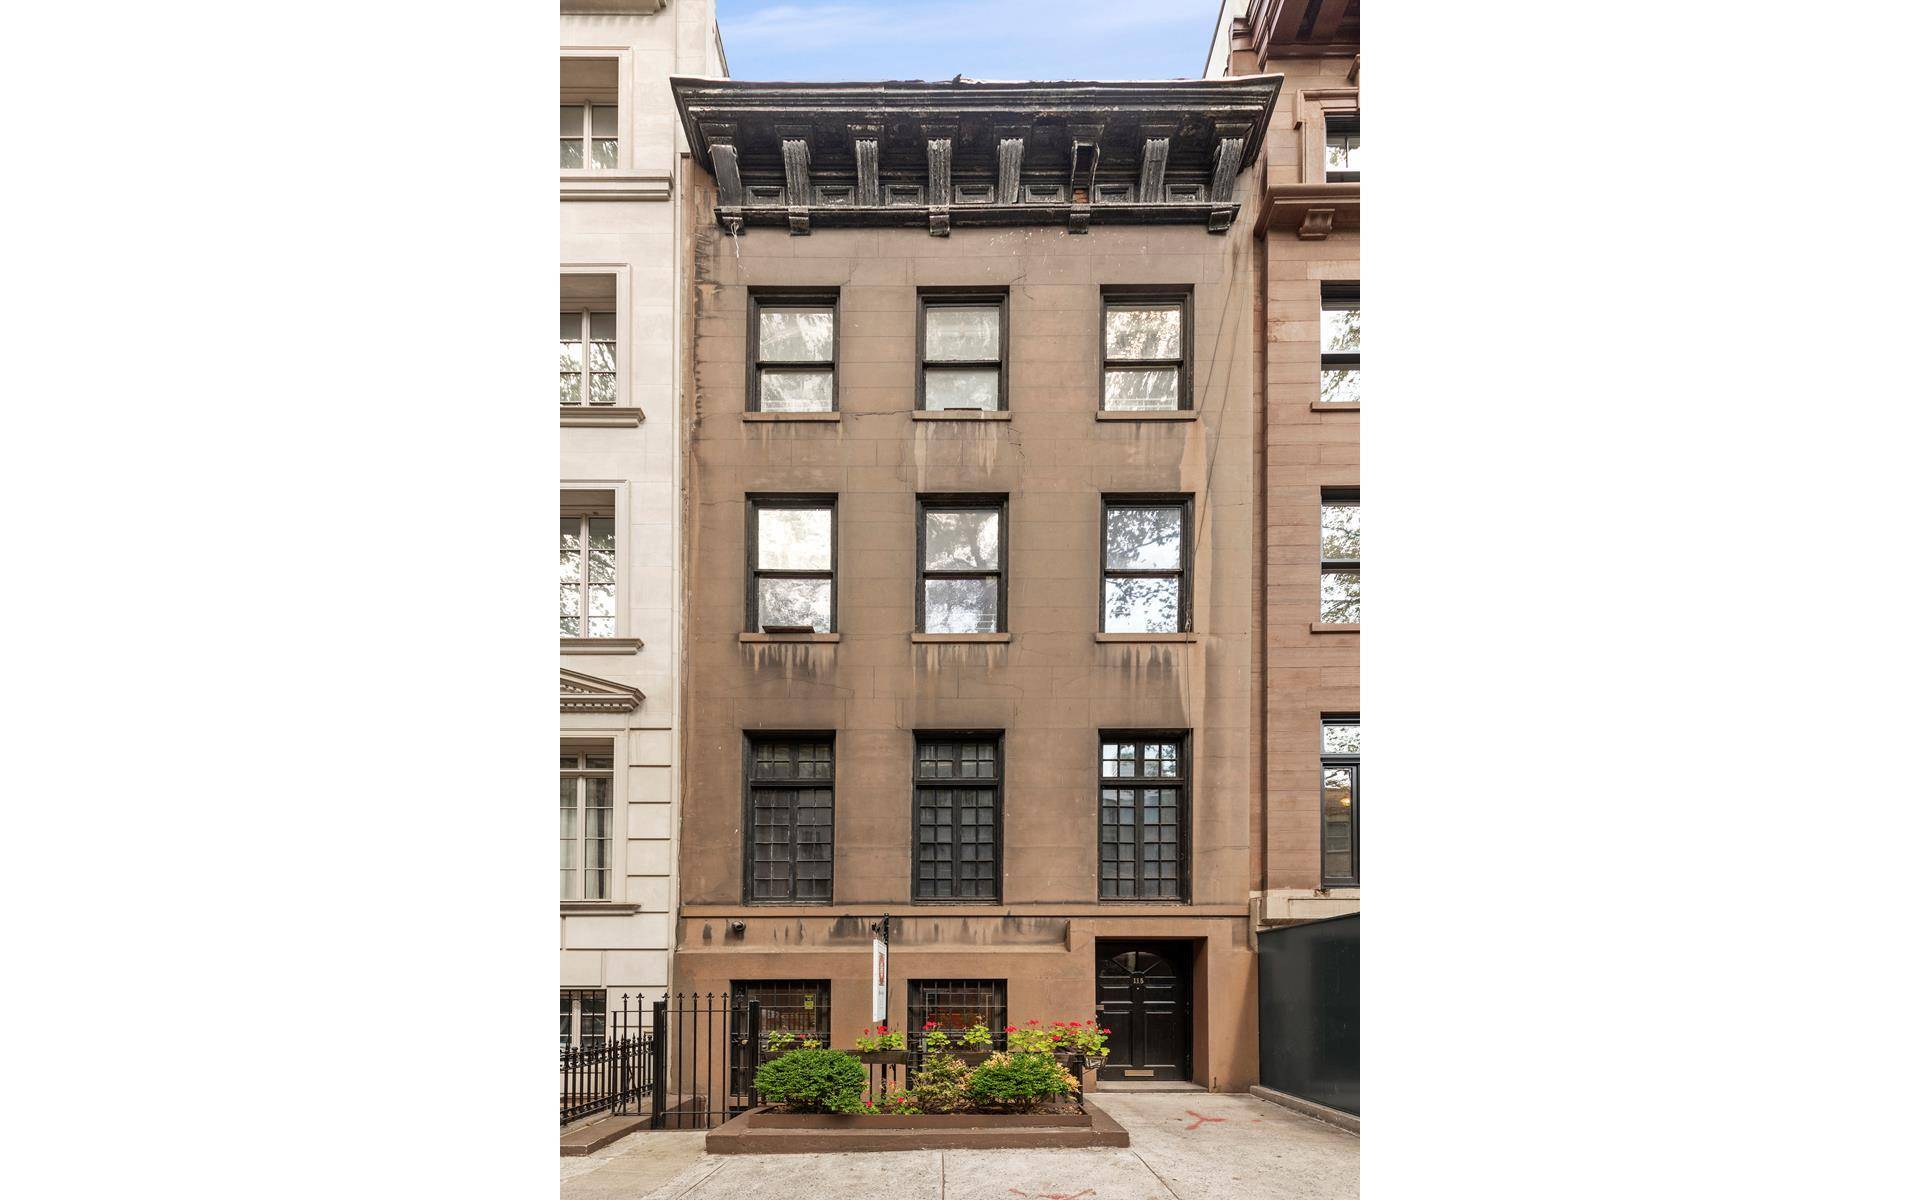 Built among the leafy homes of Manhattan's elite, the elegant, south facing 115 East 64th Street brownstone townhouse is located in the heart of the Upper East Side.